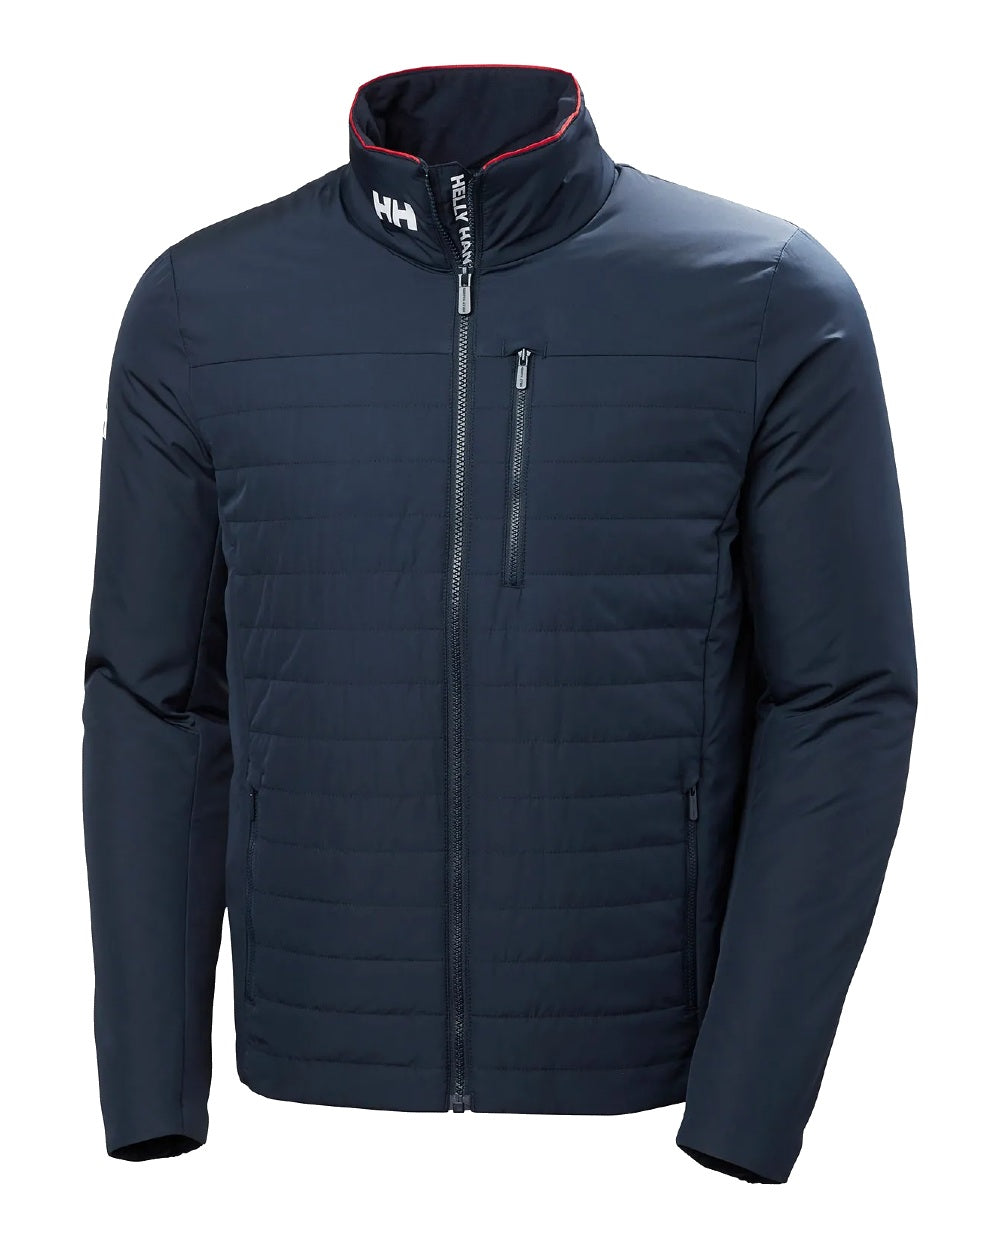 Helly Hansen Mens Crew Insulated Sailing Jacket 2.0 in Navy 